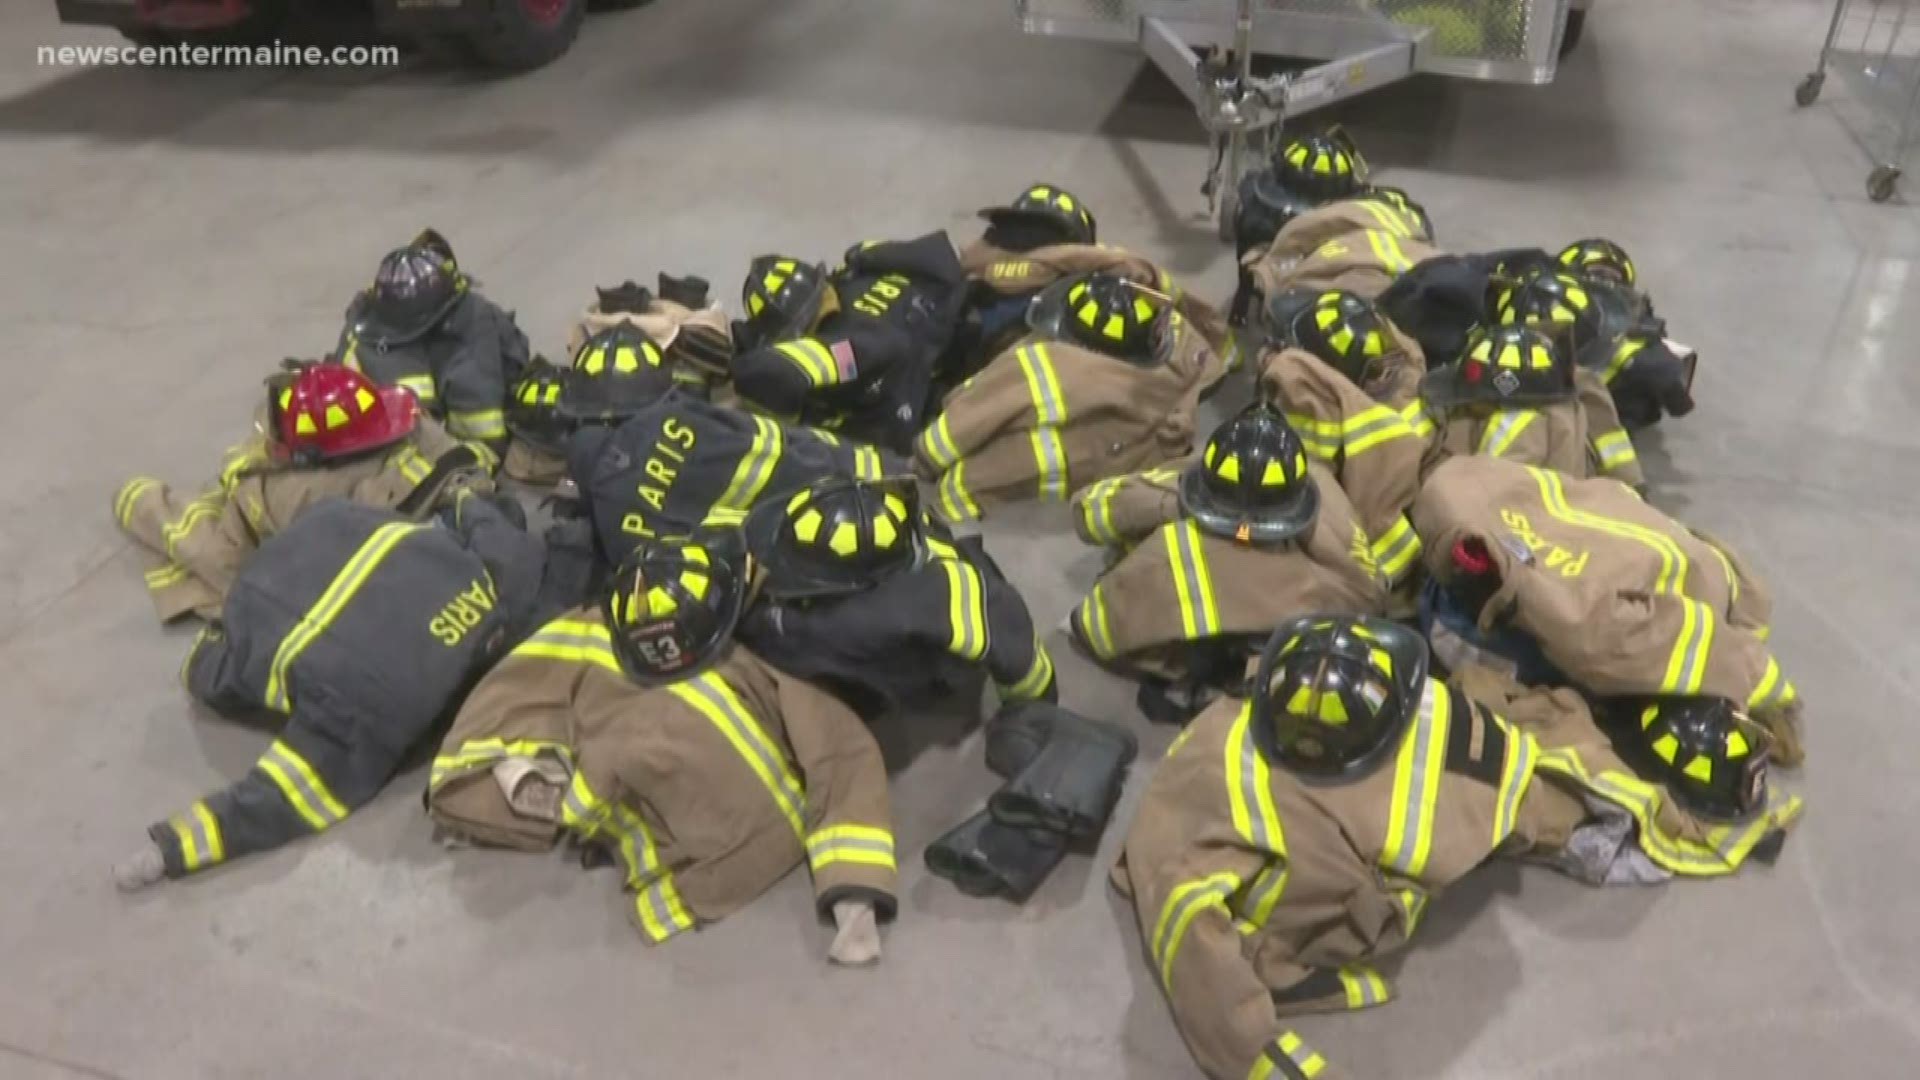 18 Paris firefighters turn in uniforms after chief decision overturned by town manager